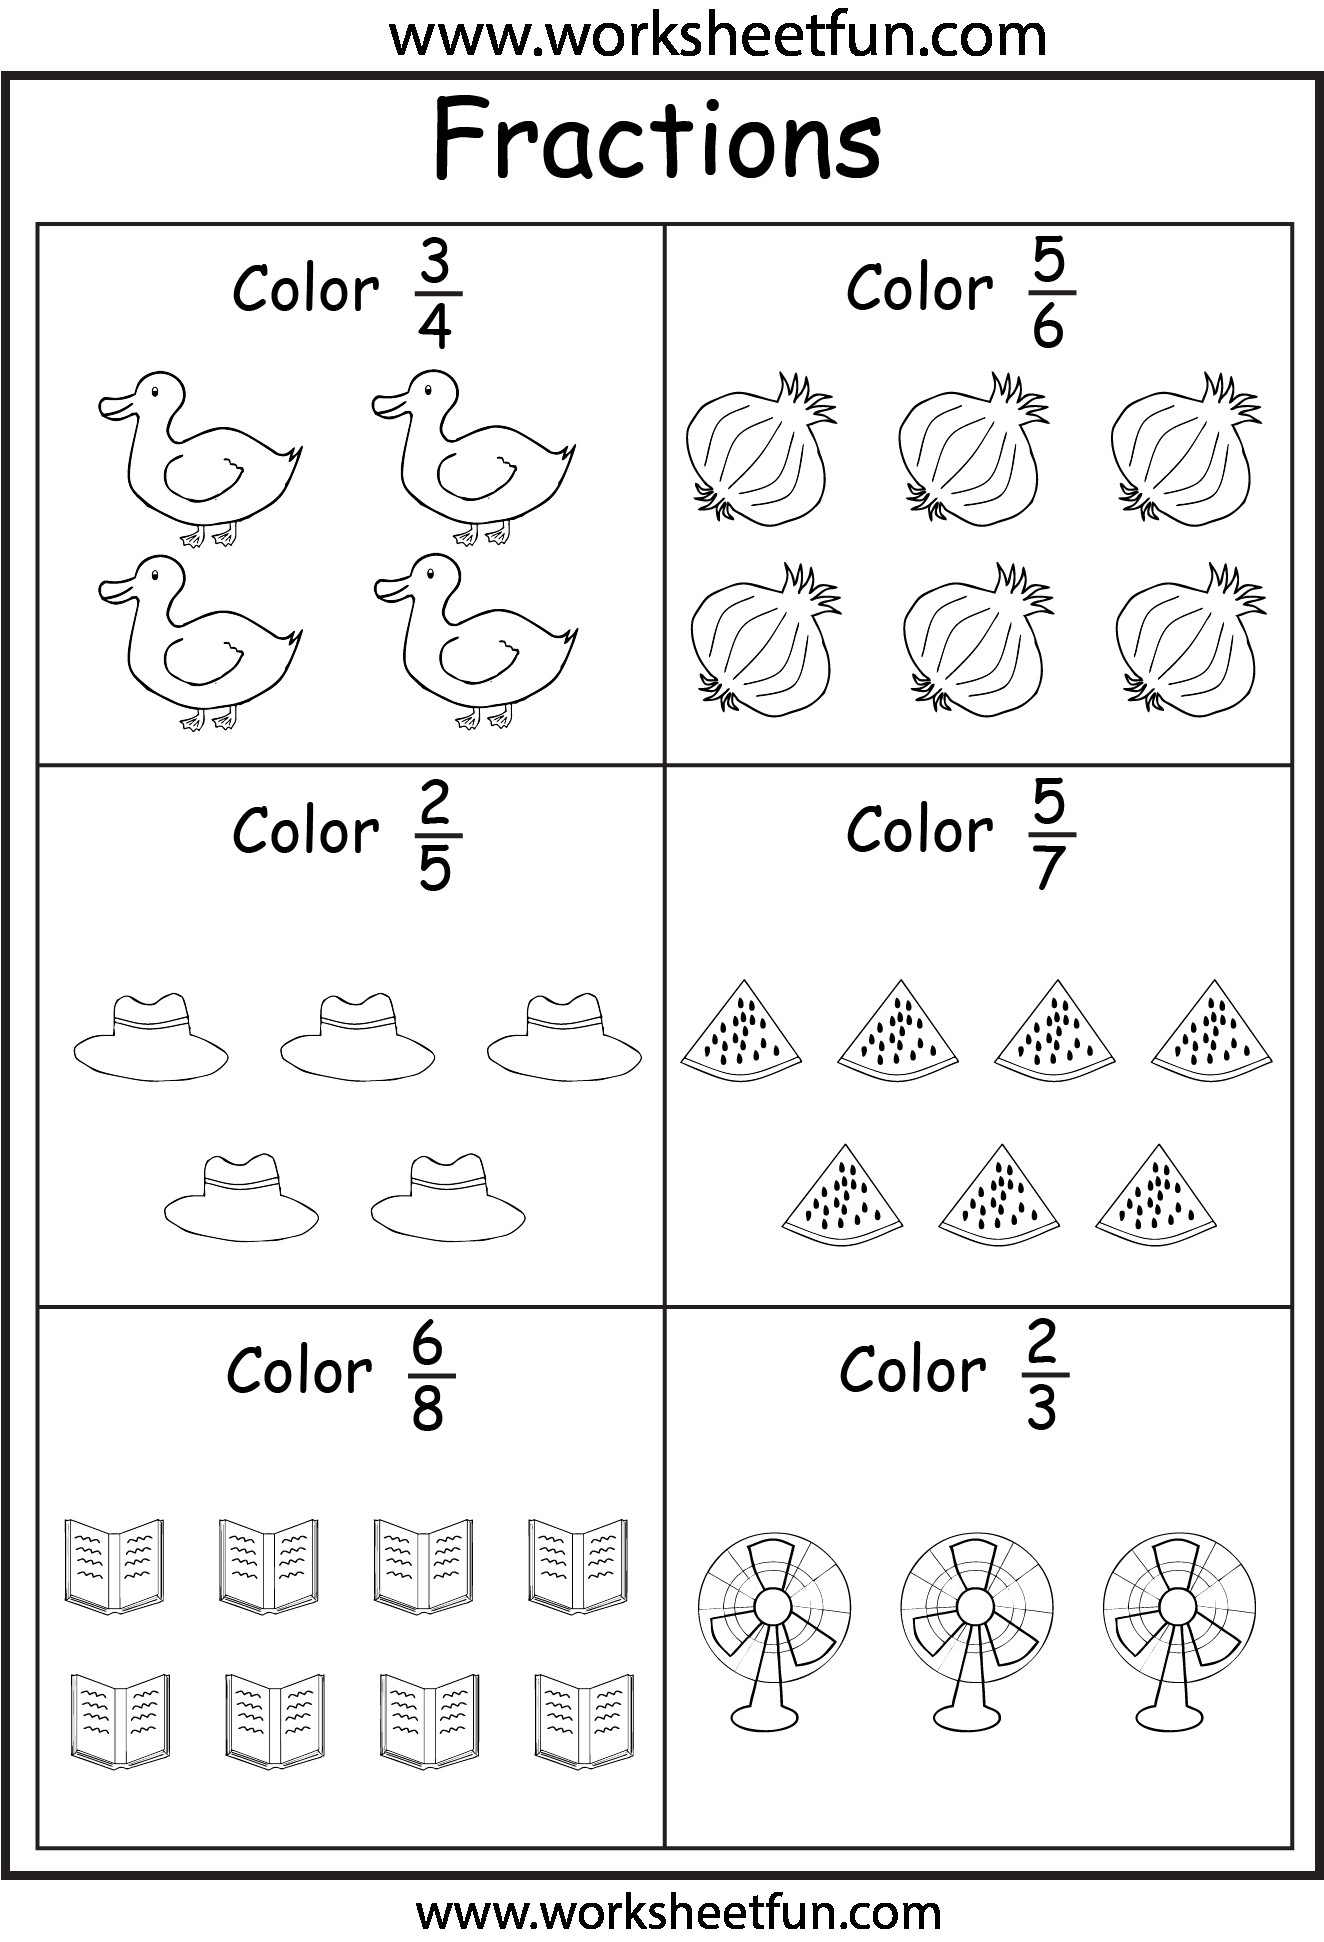 Free Math Worksheets Third Grade 3 Fractions and Decimals Equivalent Fractions